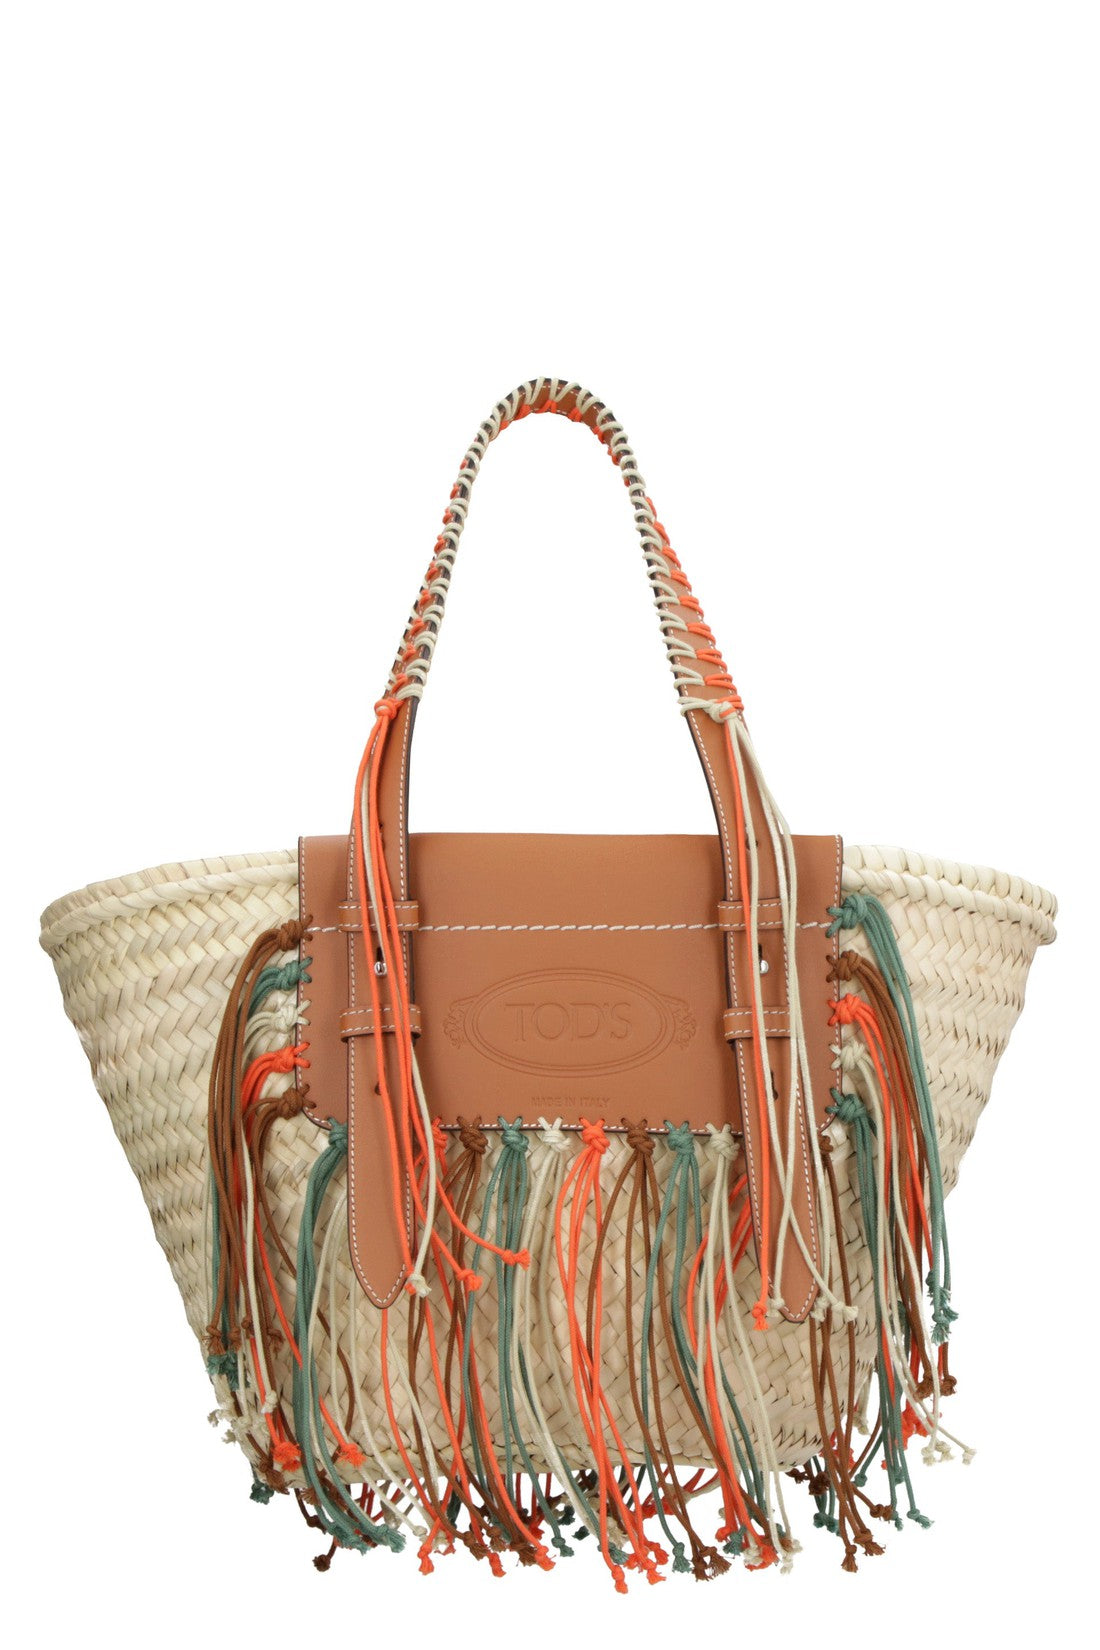 Tod's-OUTLET-SALE-Woven straw tote-ARCHIVIST